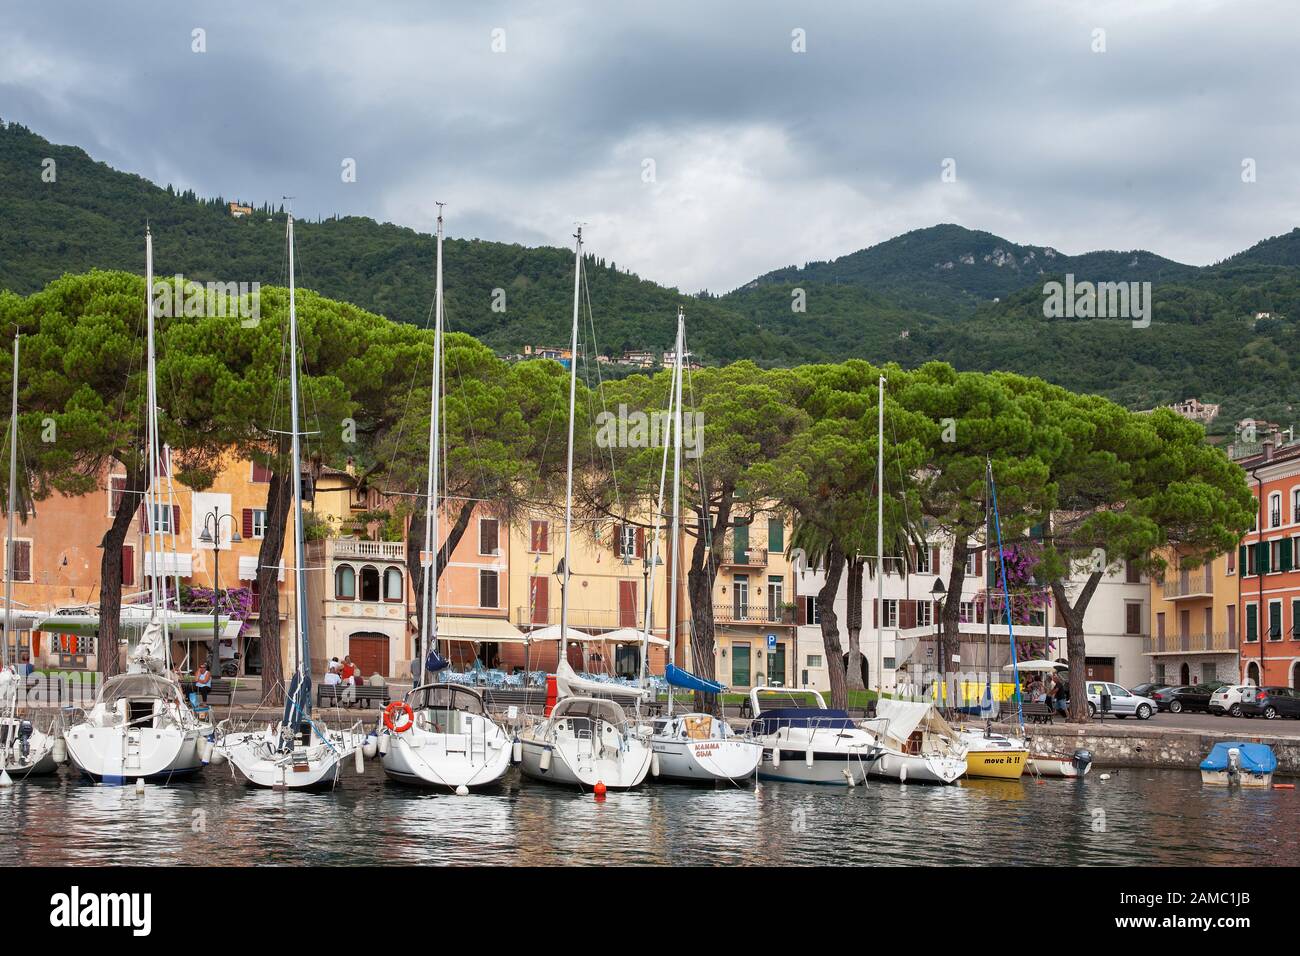 Yachts moored in the harbour at Bogliaco di Gargnano, Brescia, Lombardy, Italy Stock Photo